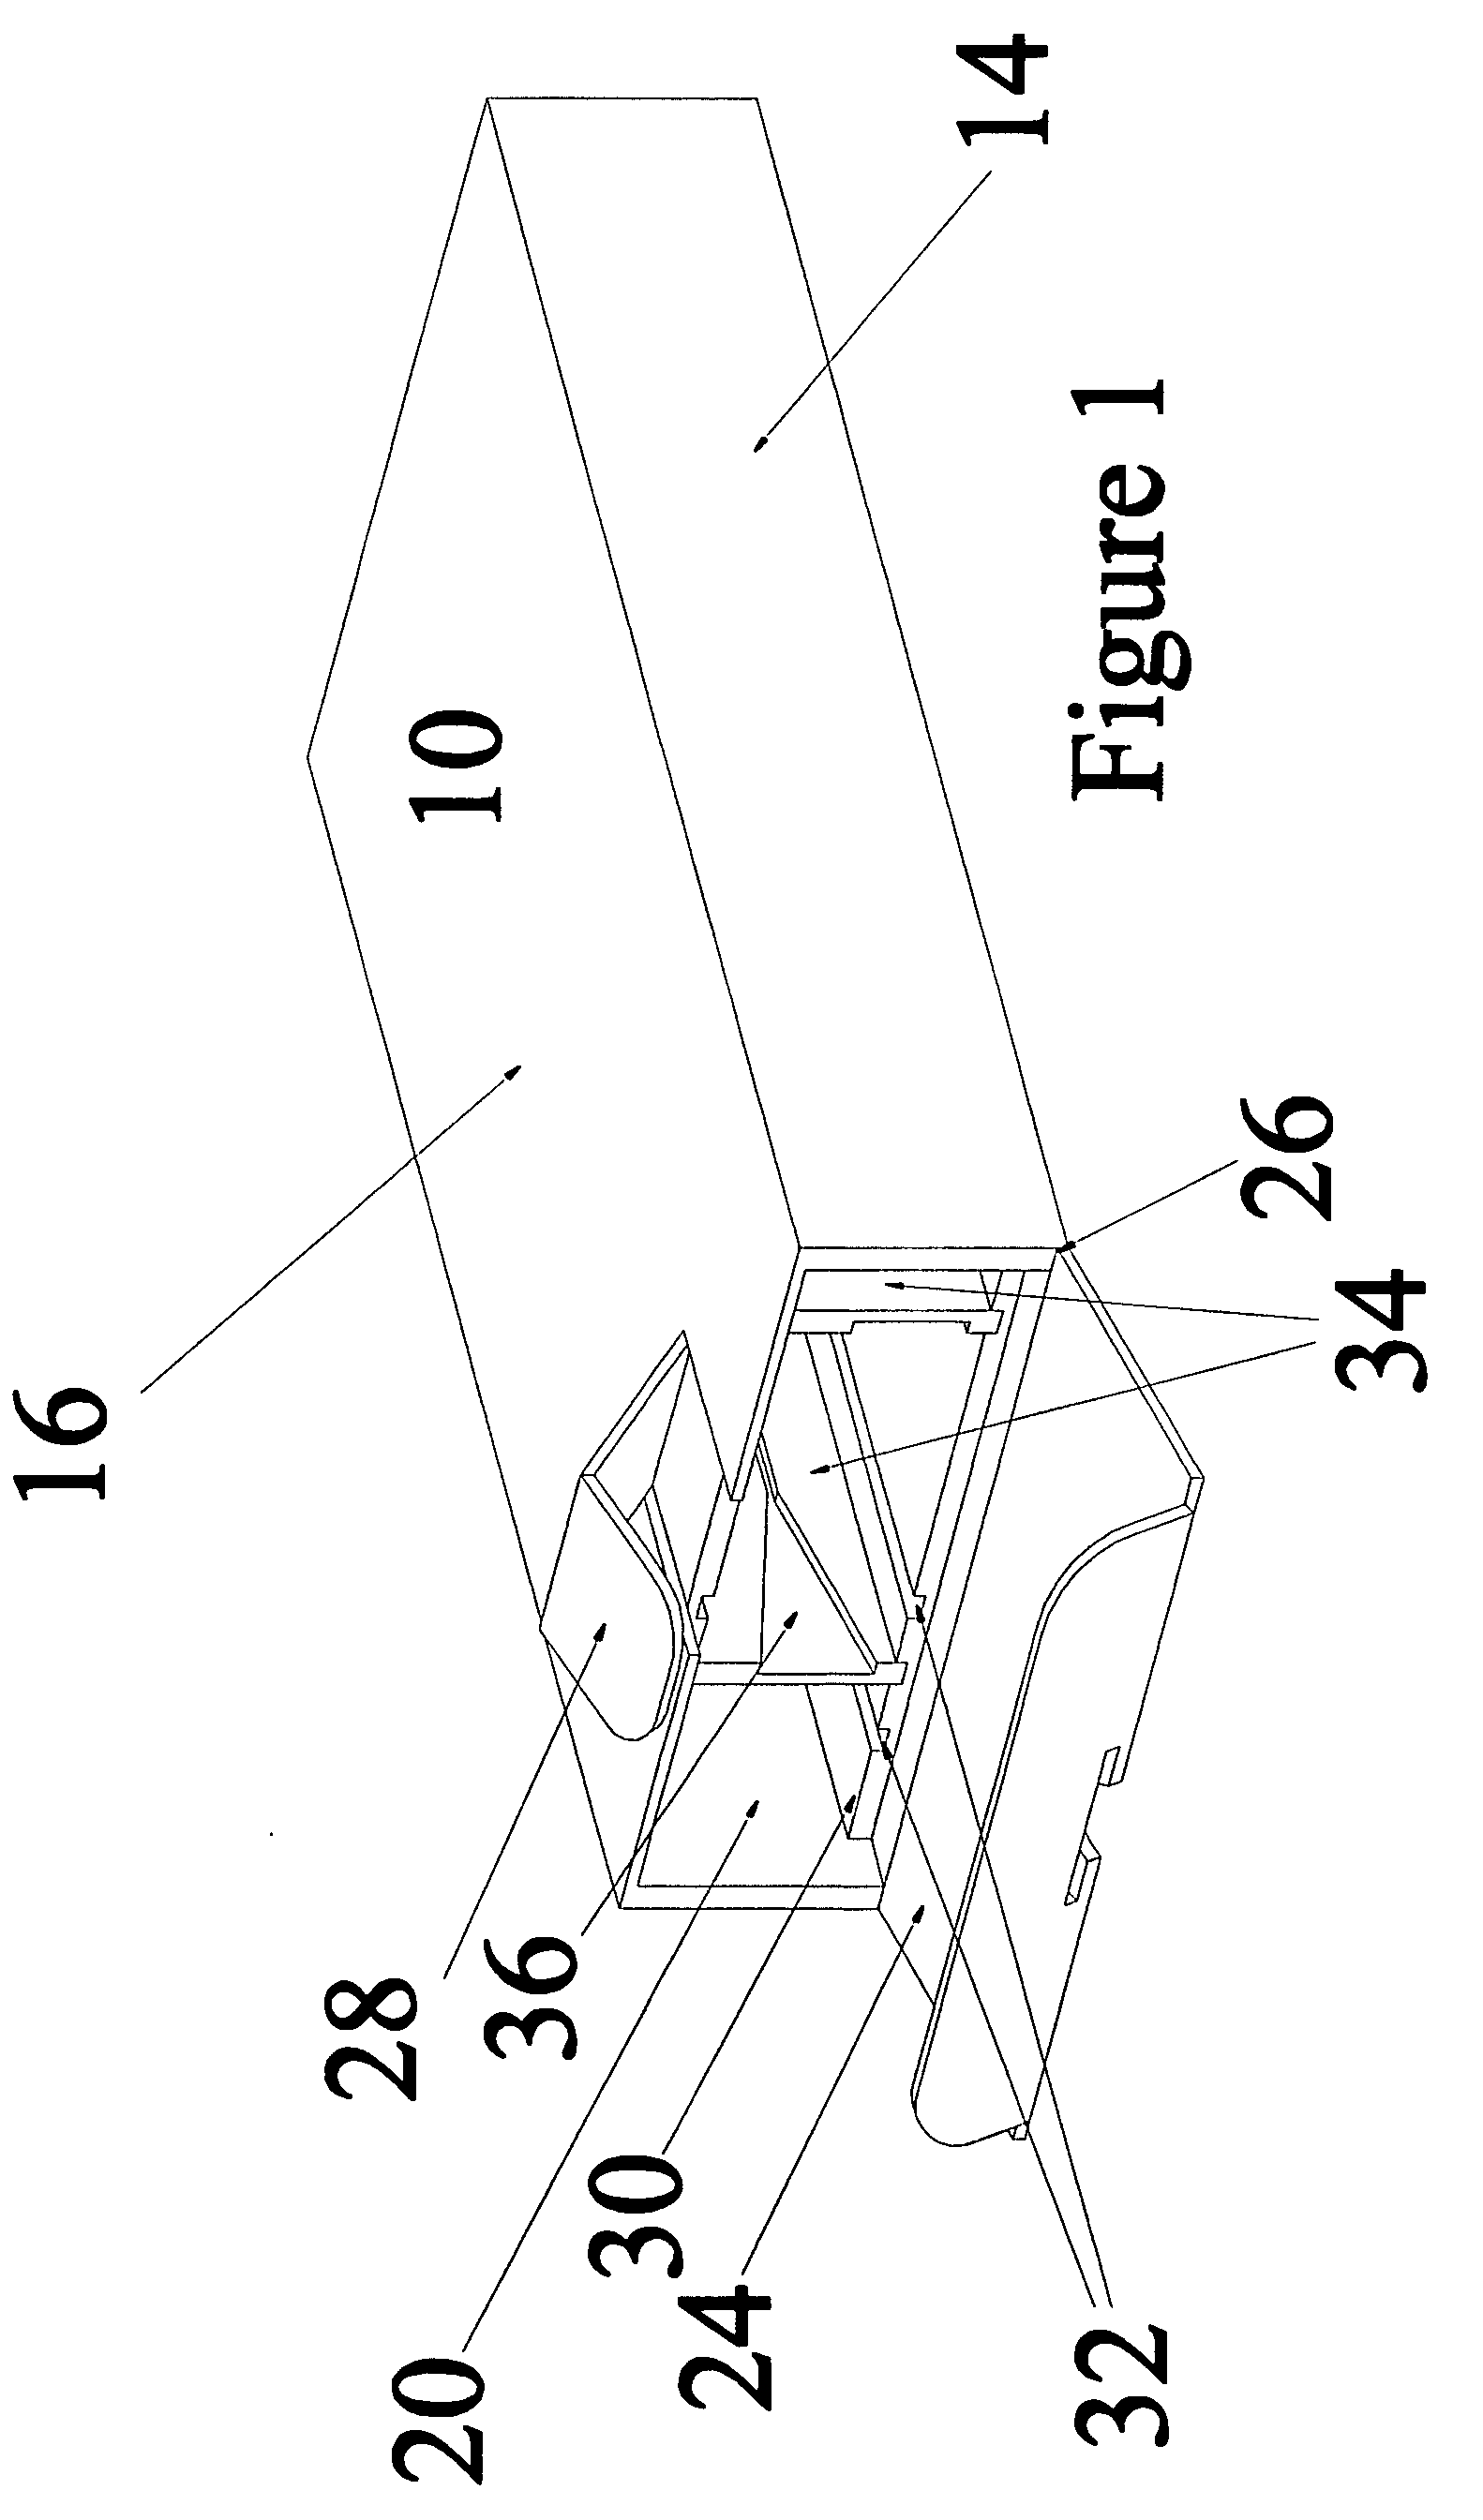 Container with adjustable inner partitions